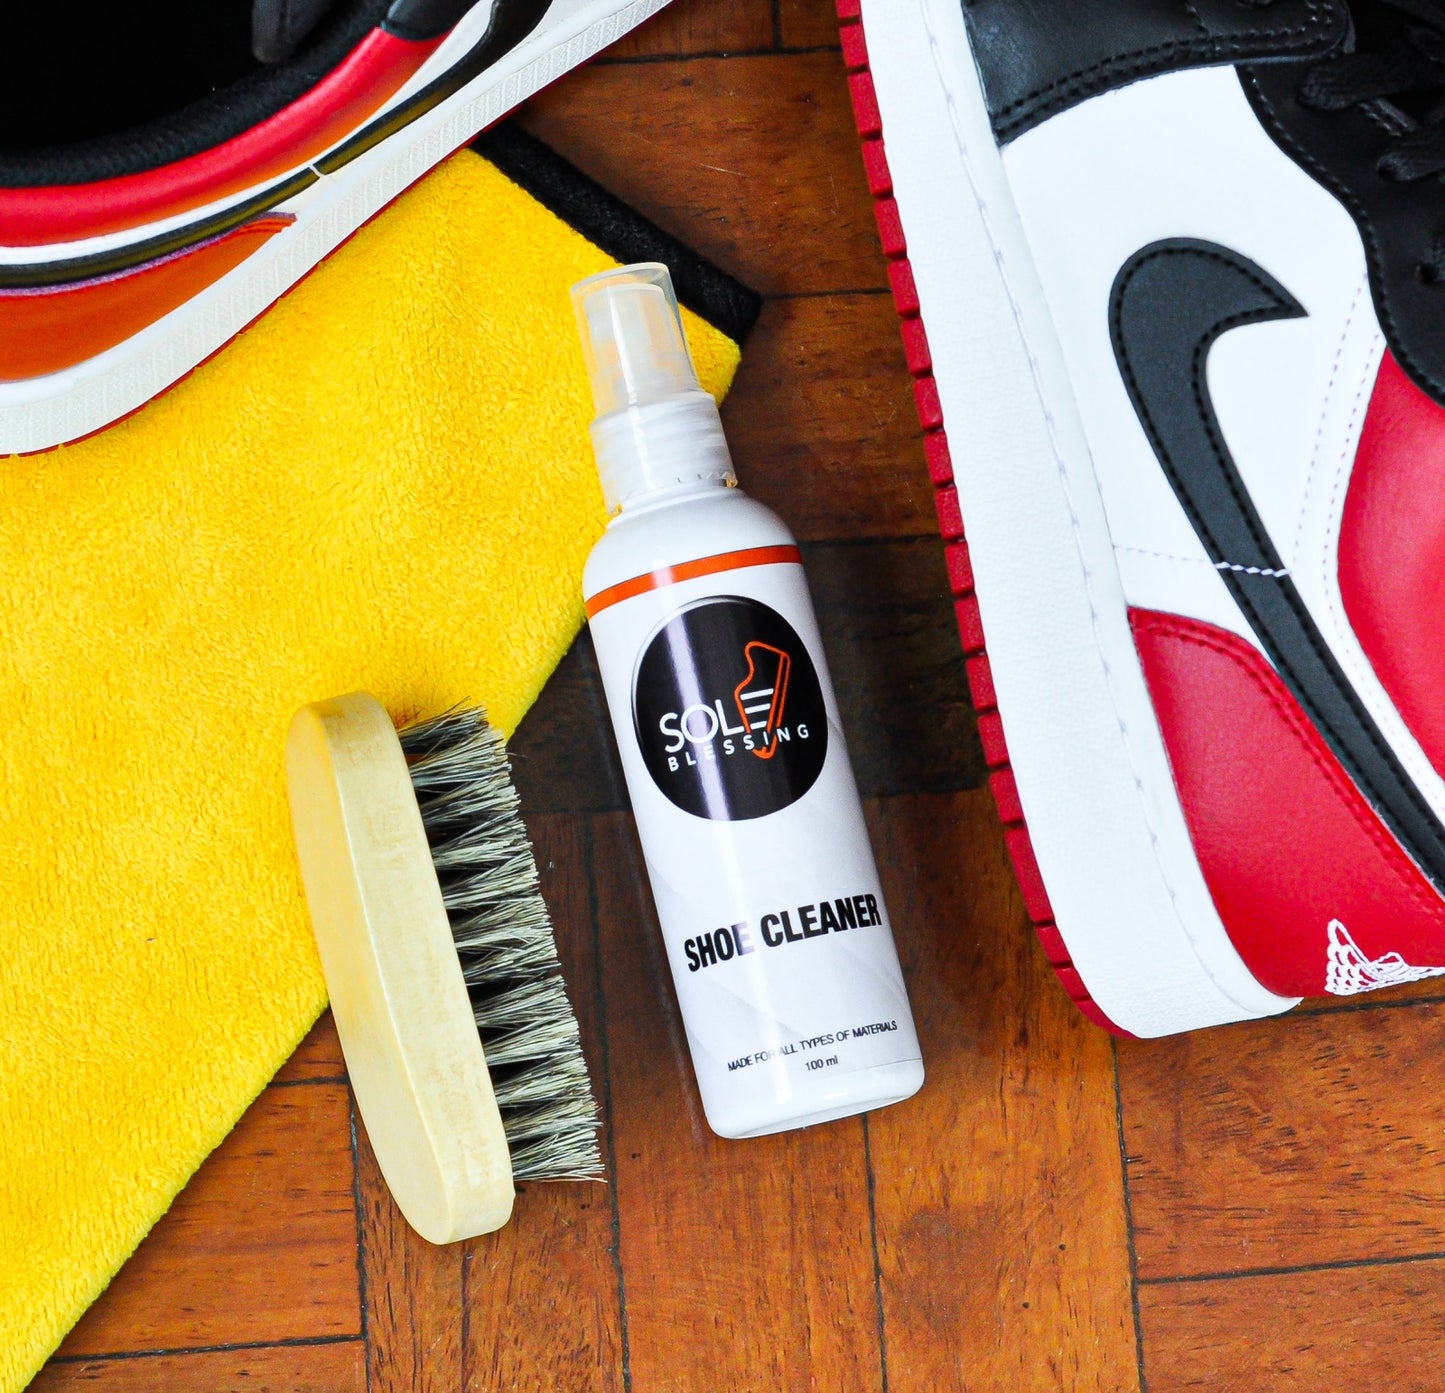 SHOE CLEANER